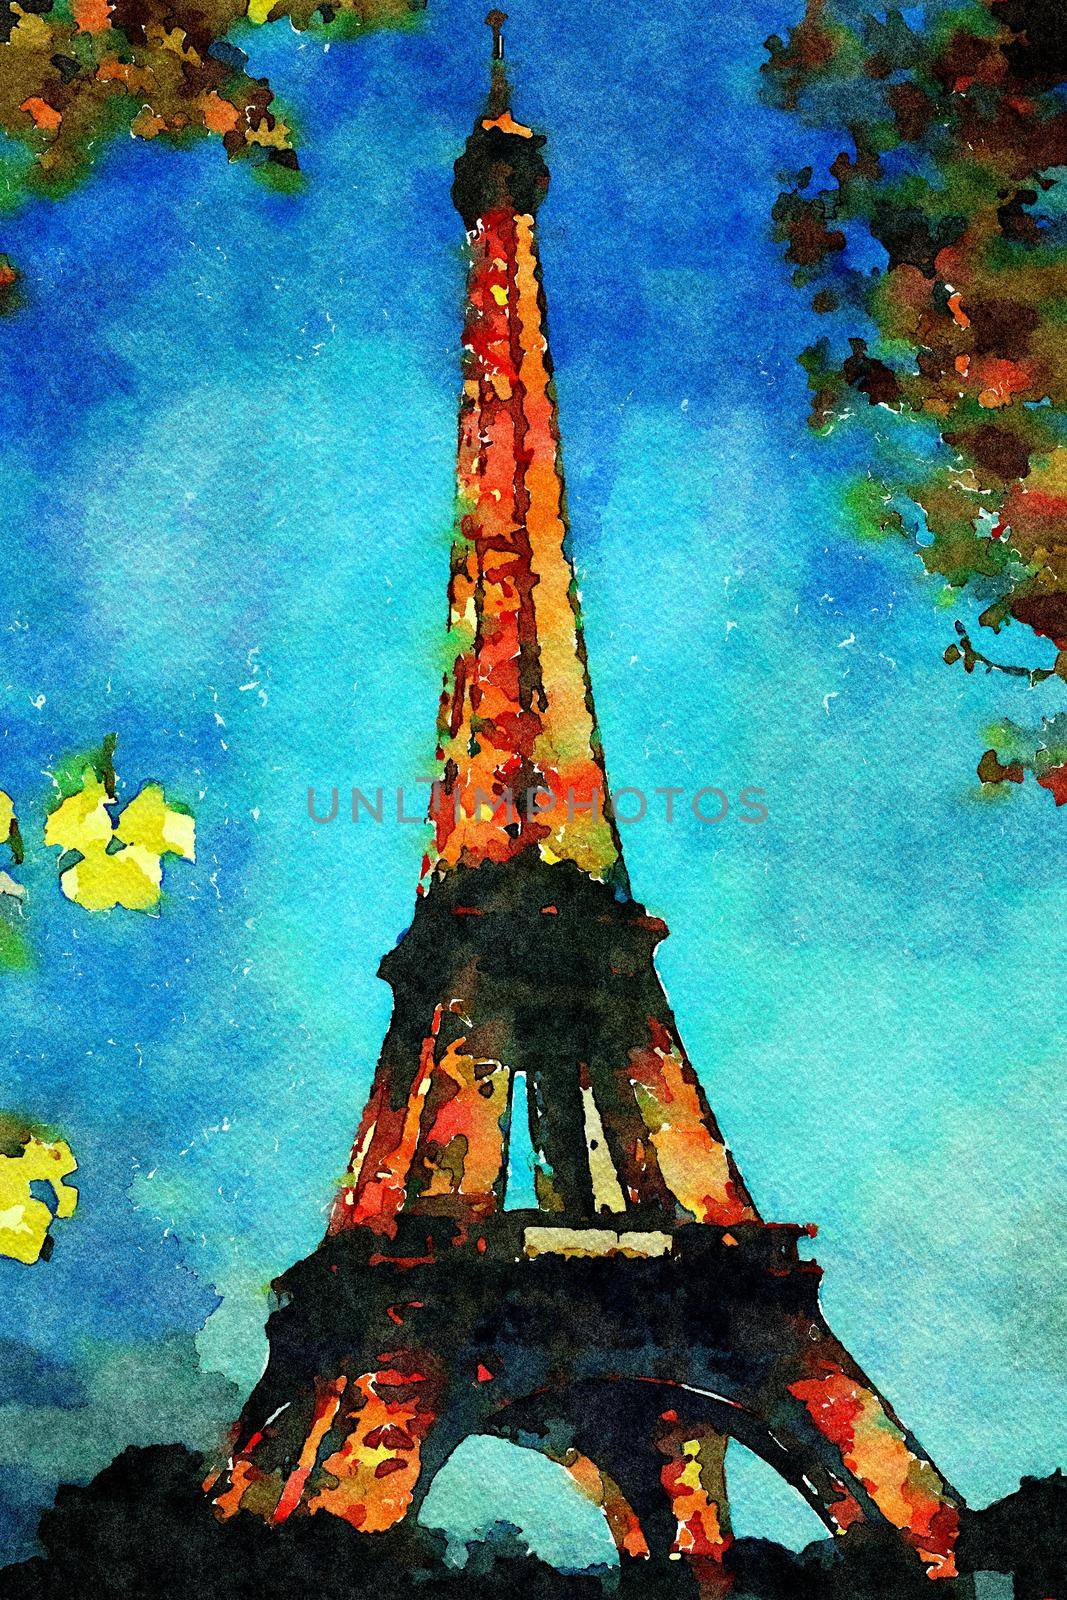 watercolor representing the view of the Eiffel tower in Paris on an autumn evening